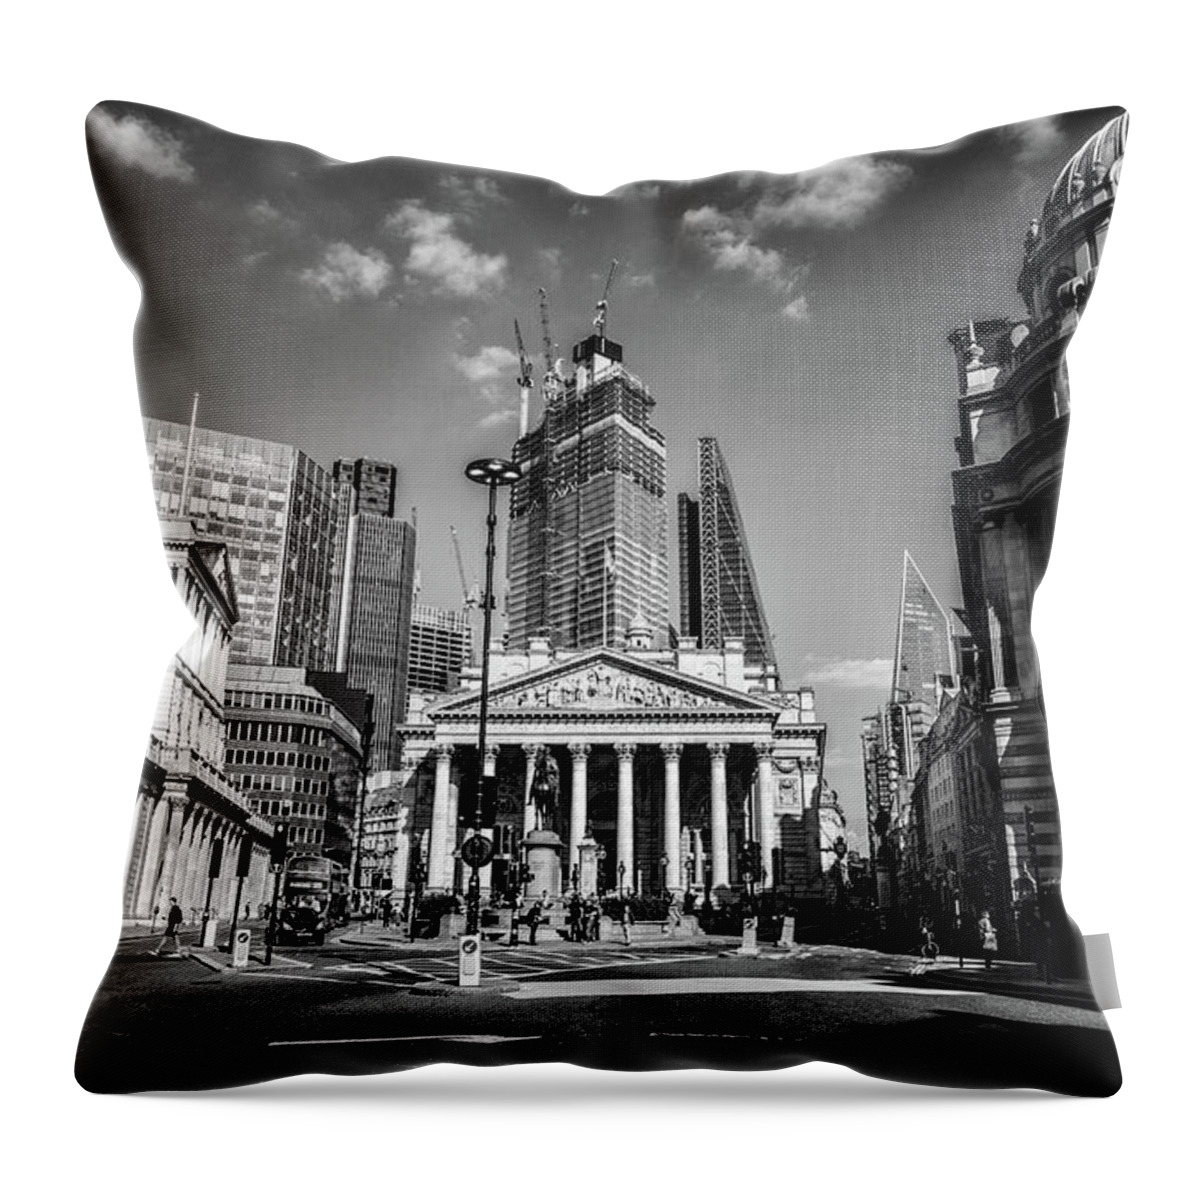 Uk Throw Pillow featuring the photograph The Bank Of England by Martin Newman